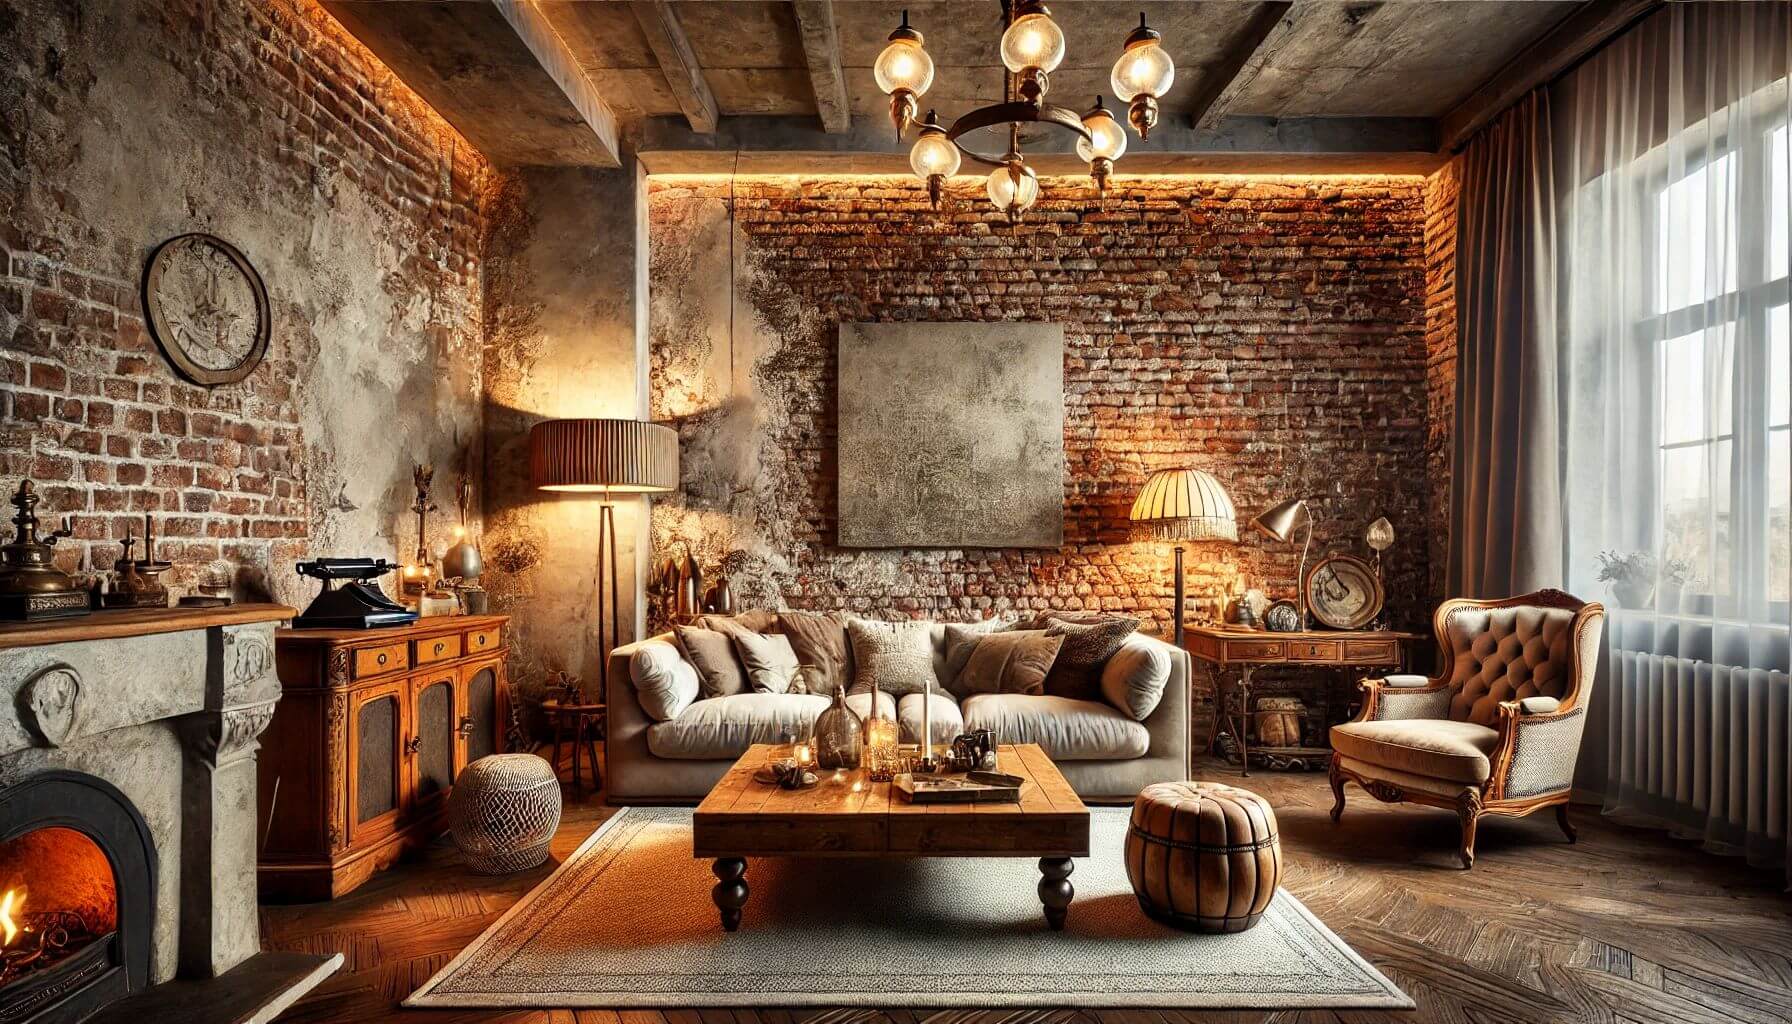 German schmear interior brick wall: A rustic elegance for your home